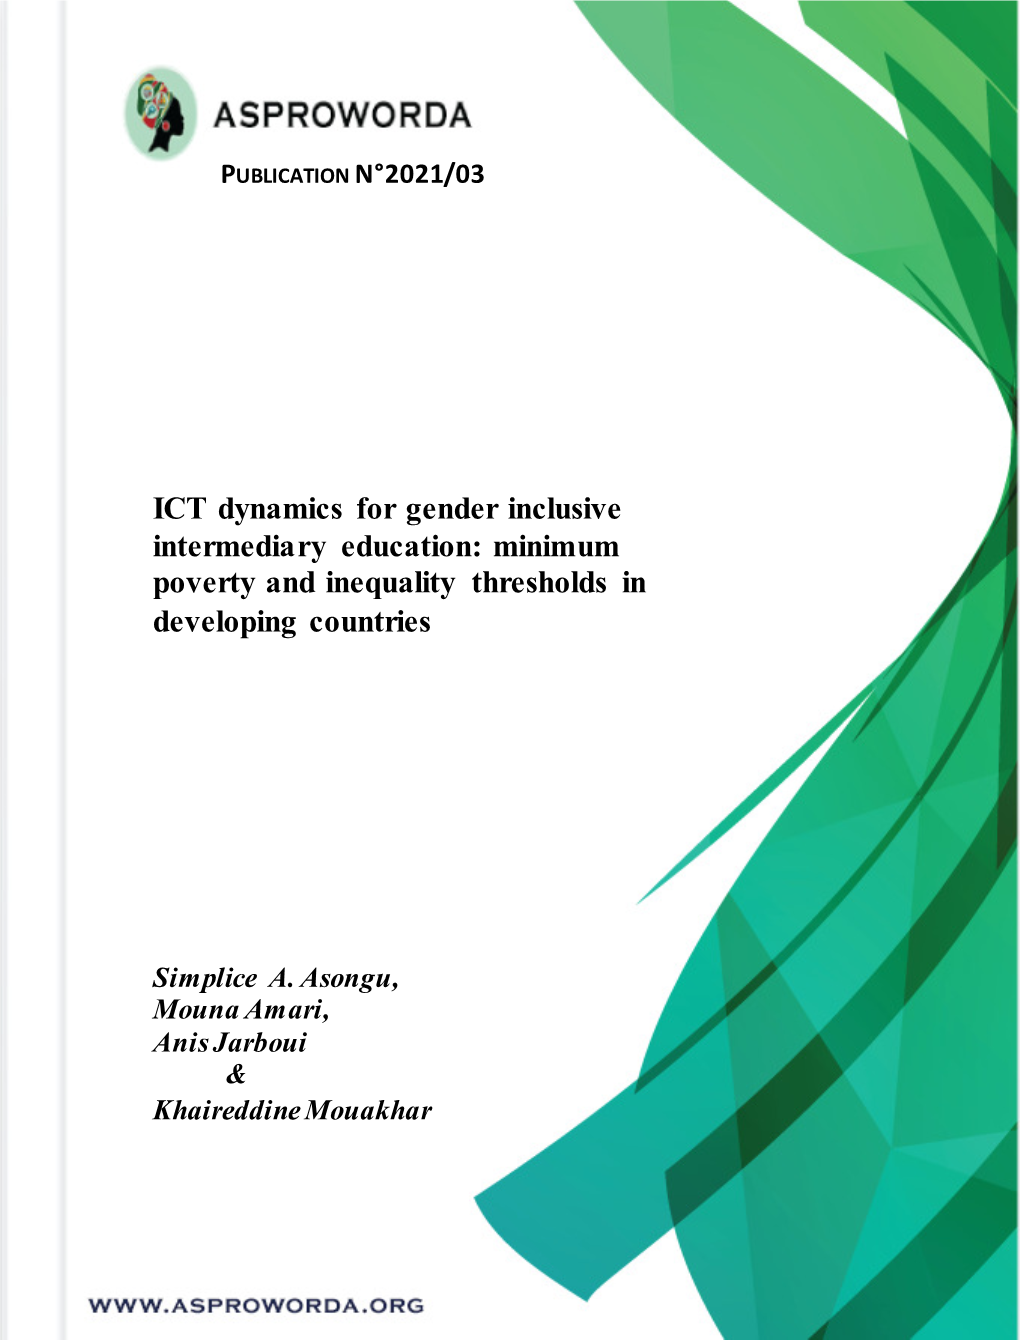 ICT Dynamics for Gender Inclusive Intermediary Education: Minimum Poverty and Inequality Thresholds in Developing Countries